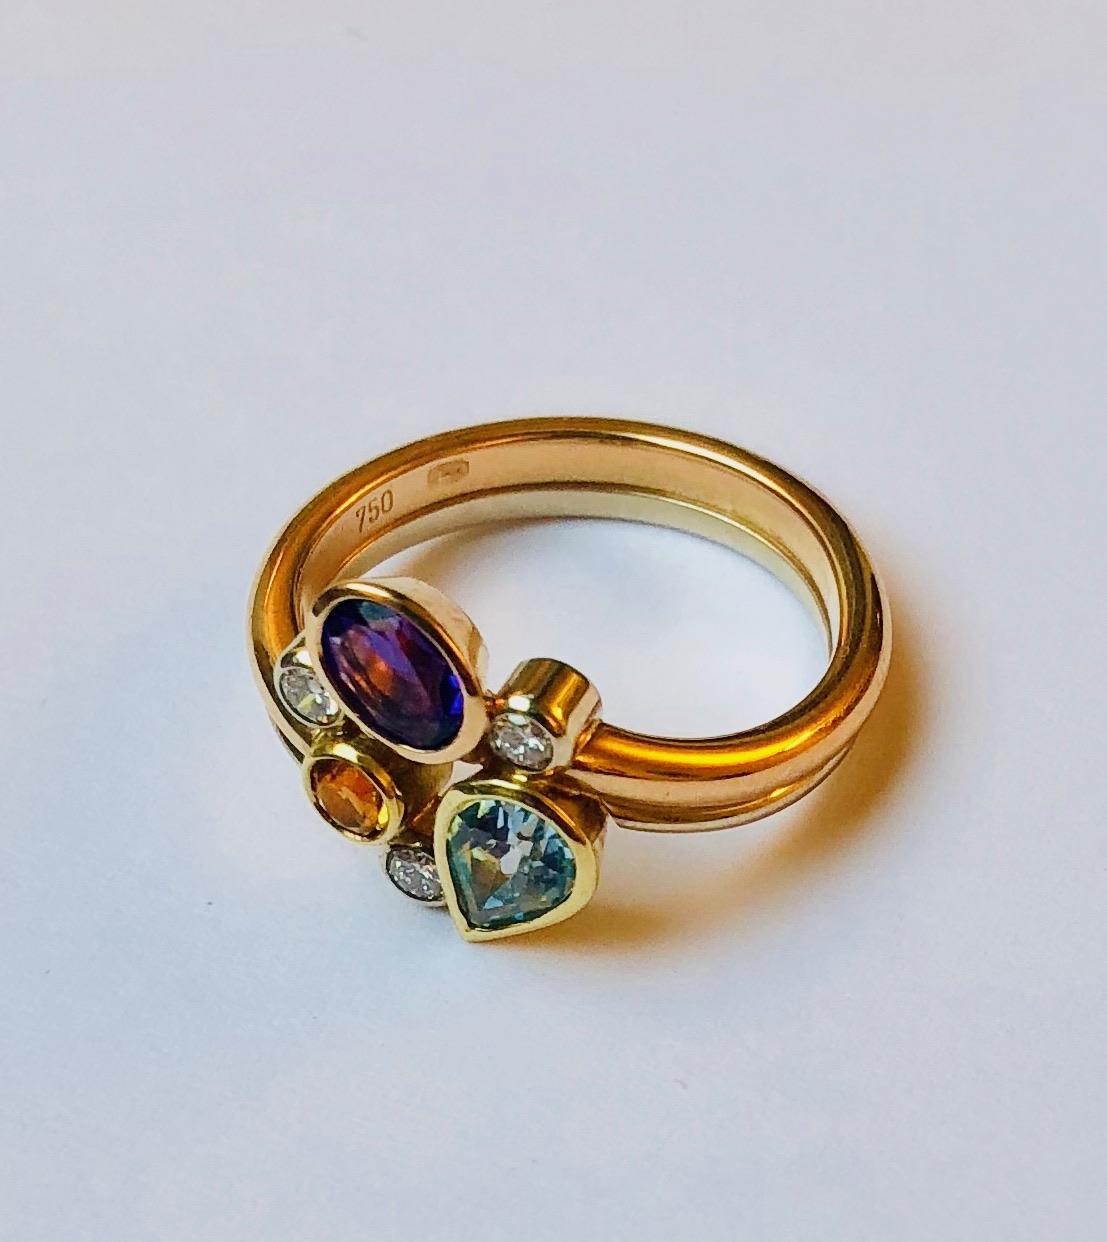 This stunning ring features several gemstones, such as topaz, emerald, diamond and amethyst. Each stone is set in white, yellow or rose 18kt gold, depending on the color as to best accentuate it.

This pendant was designed and made by Van der Veken,